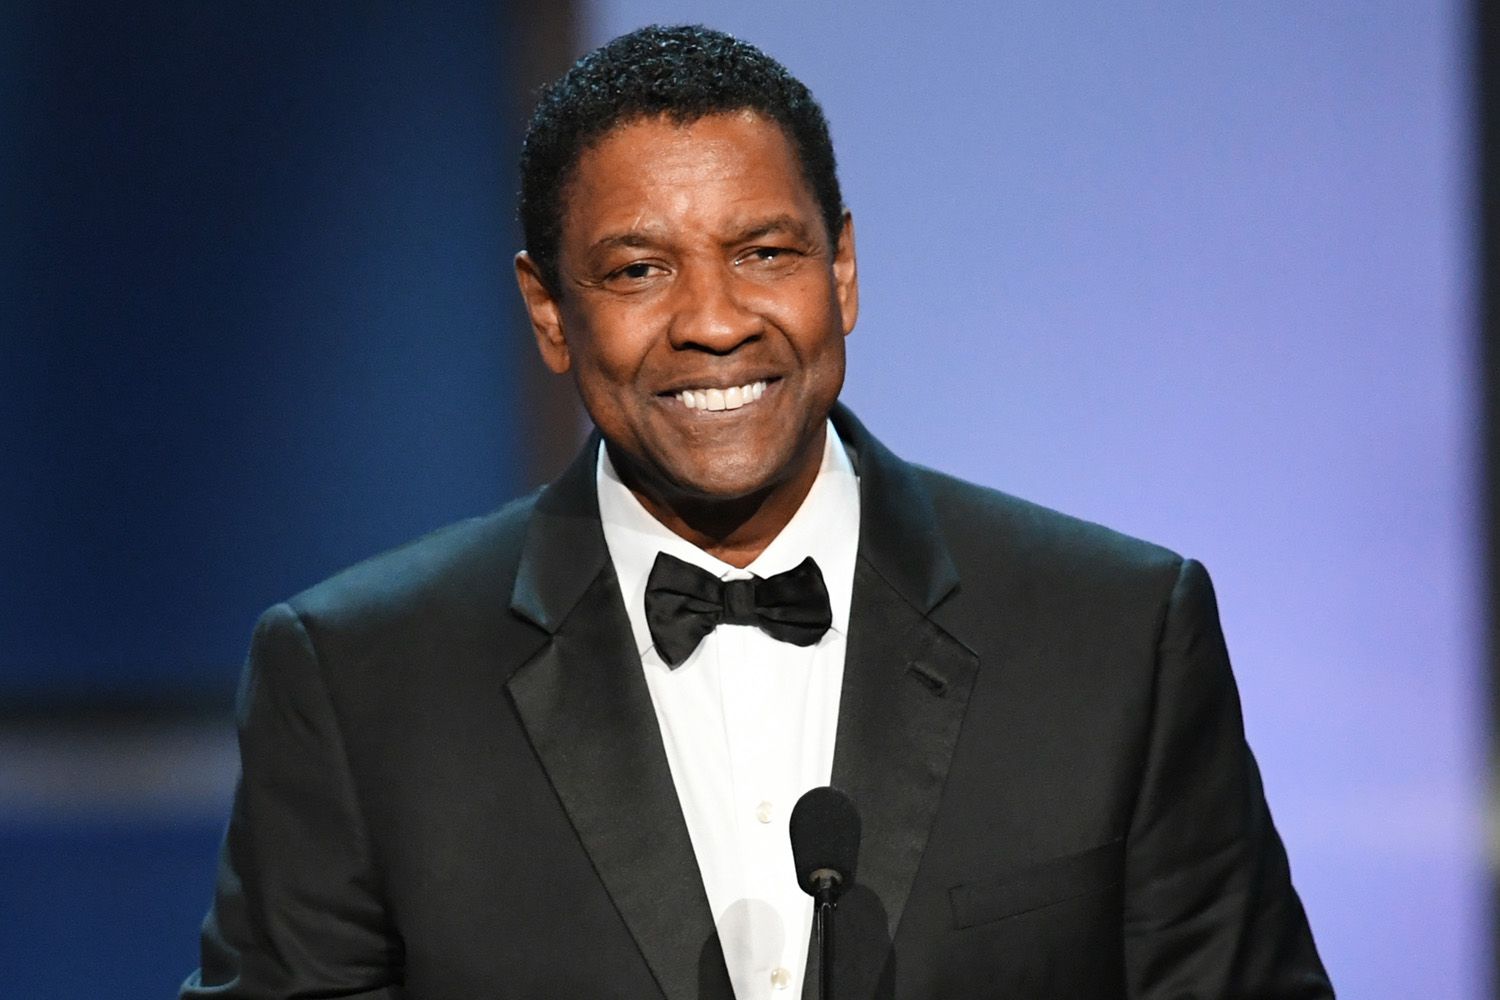 Denzel Washington Bows Out of Presidential Medal of Freedom Ceremony After Contracting COVID